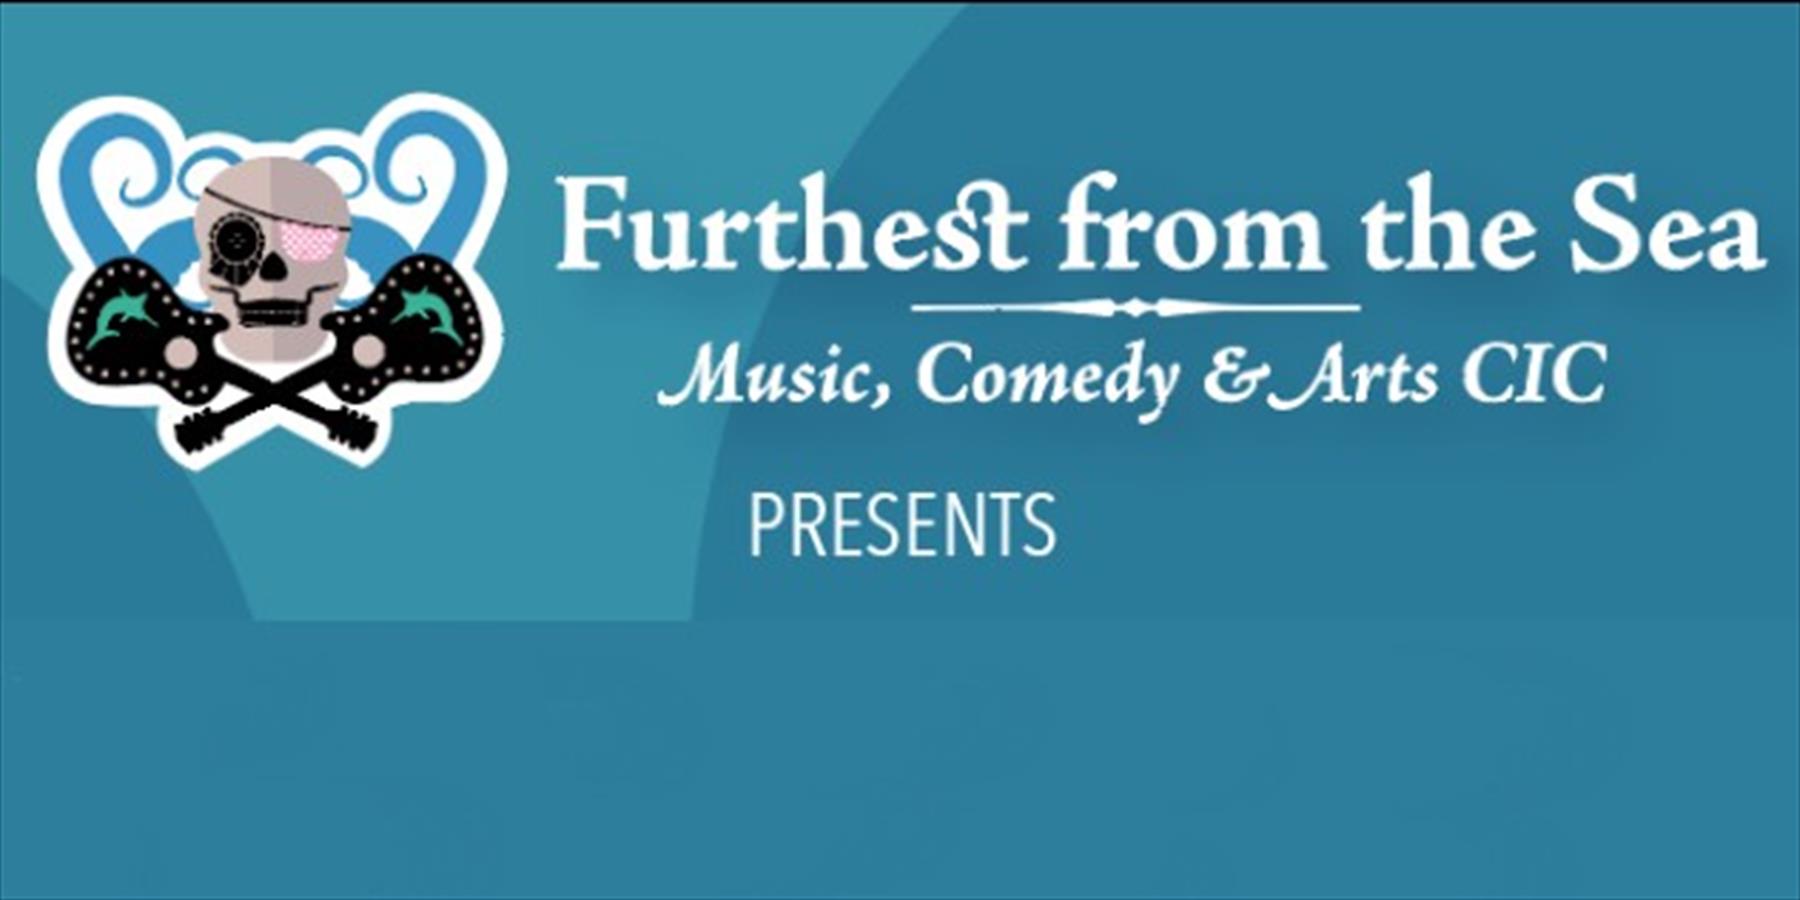 Furthest from the sea promoters logo